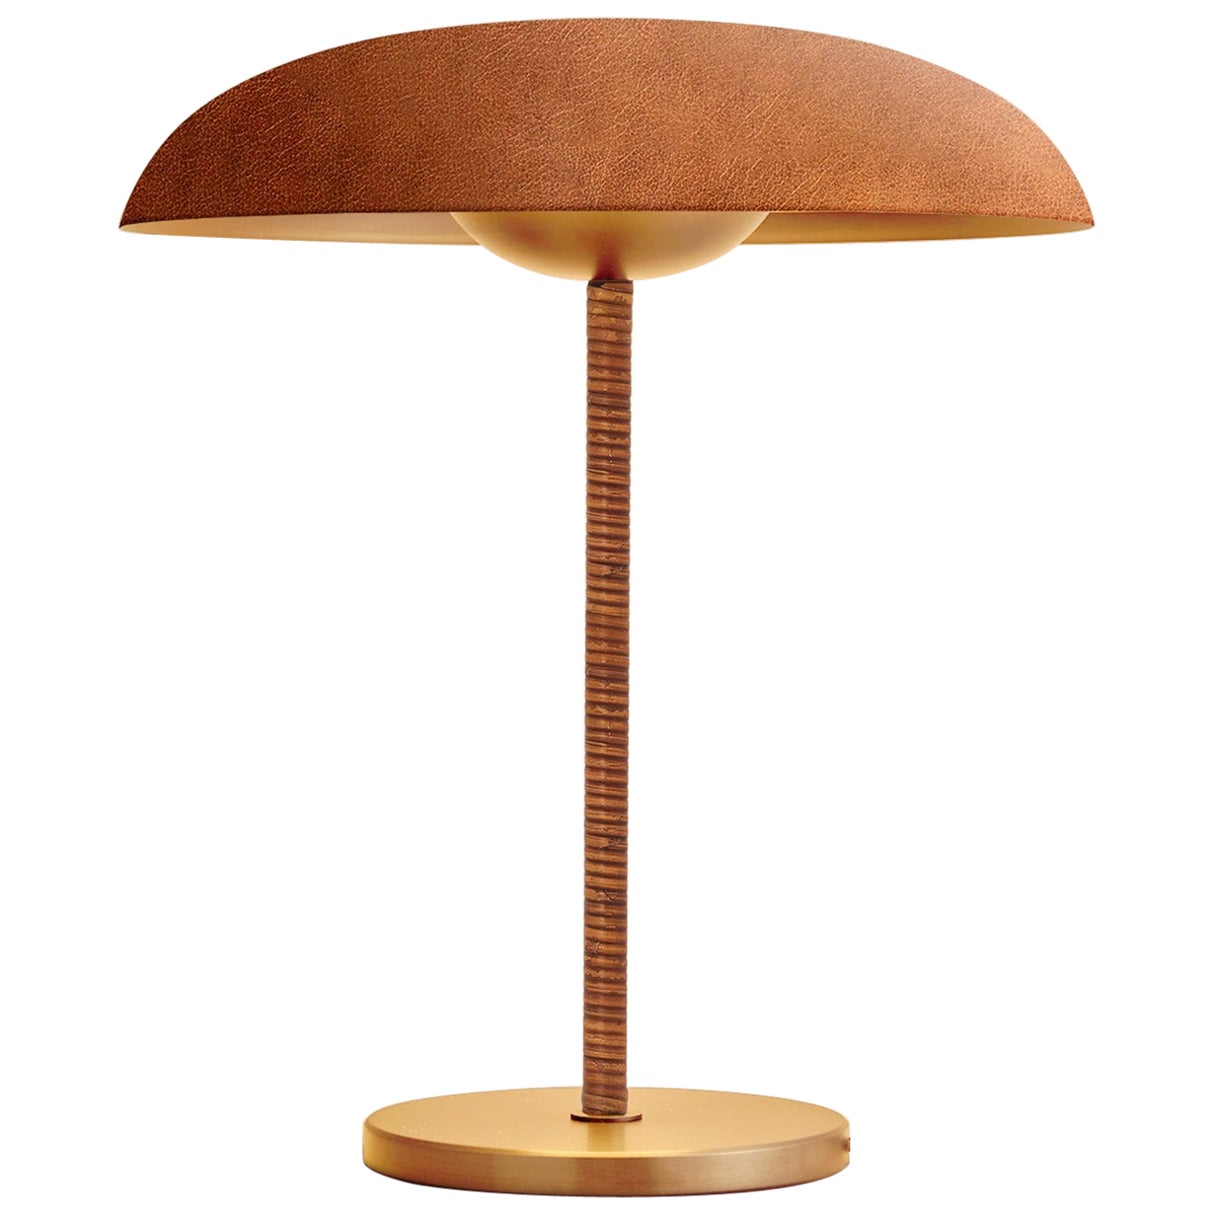 'Cosmic Solstice Caramel' Table Lamp, Handmade Leather Wrapped Brass Table Light For Sale